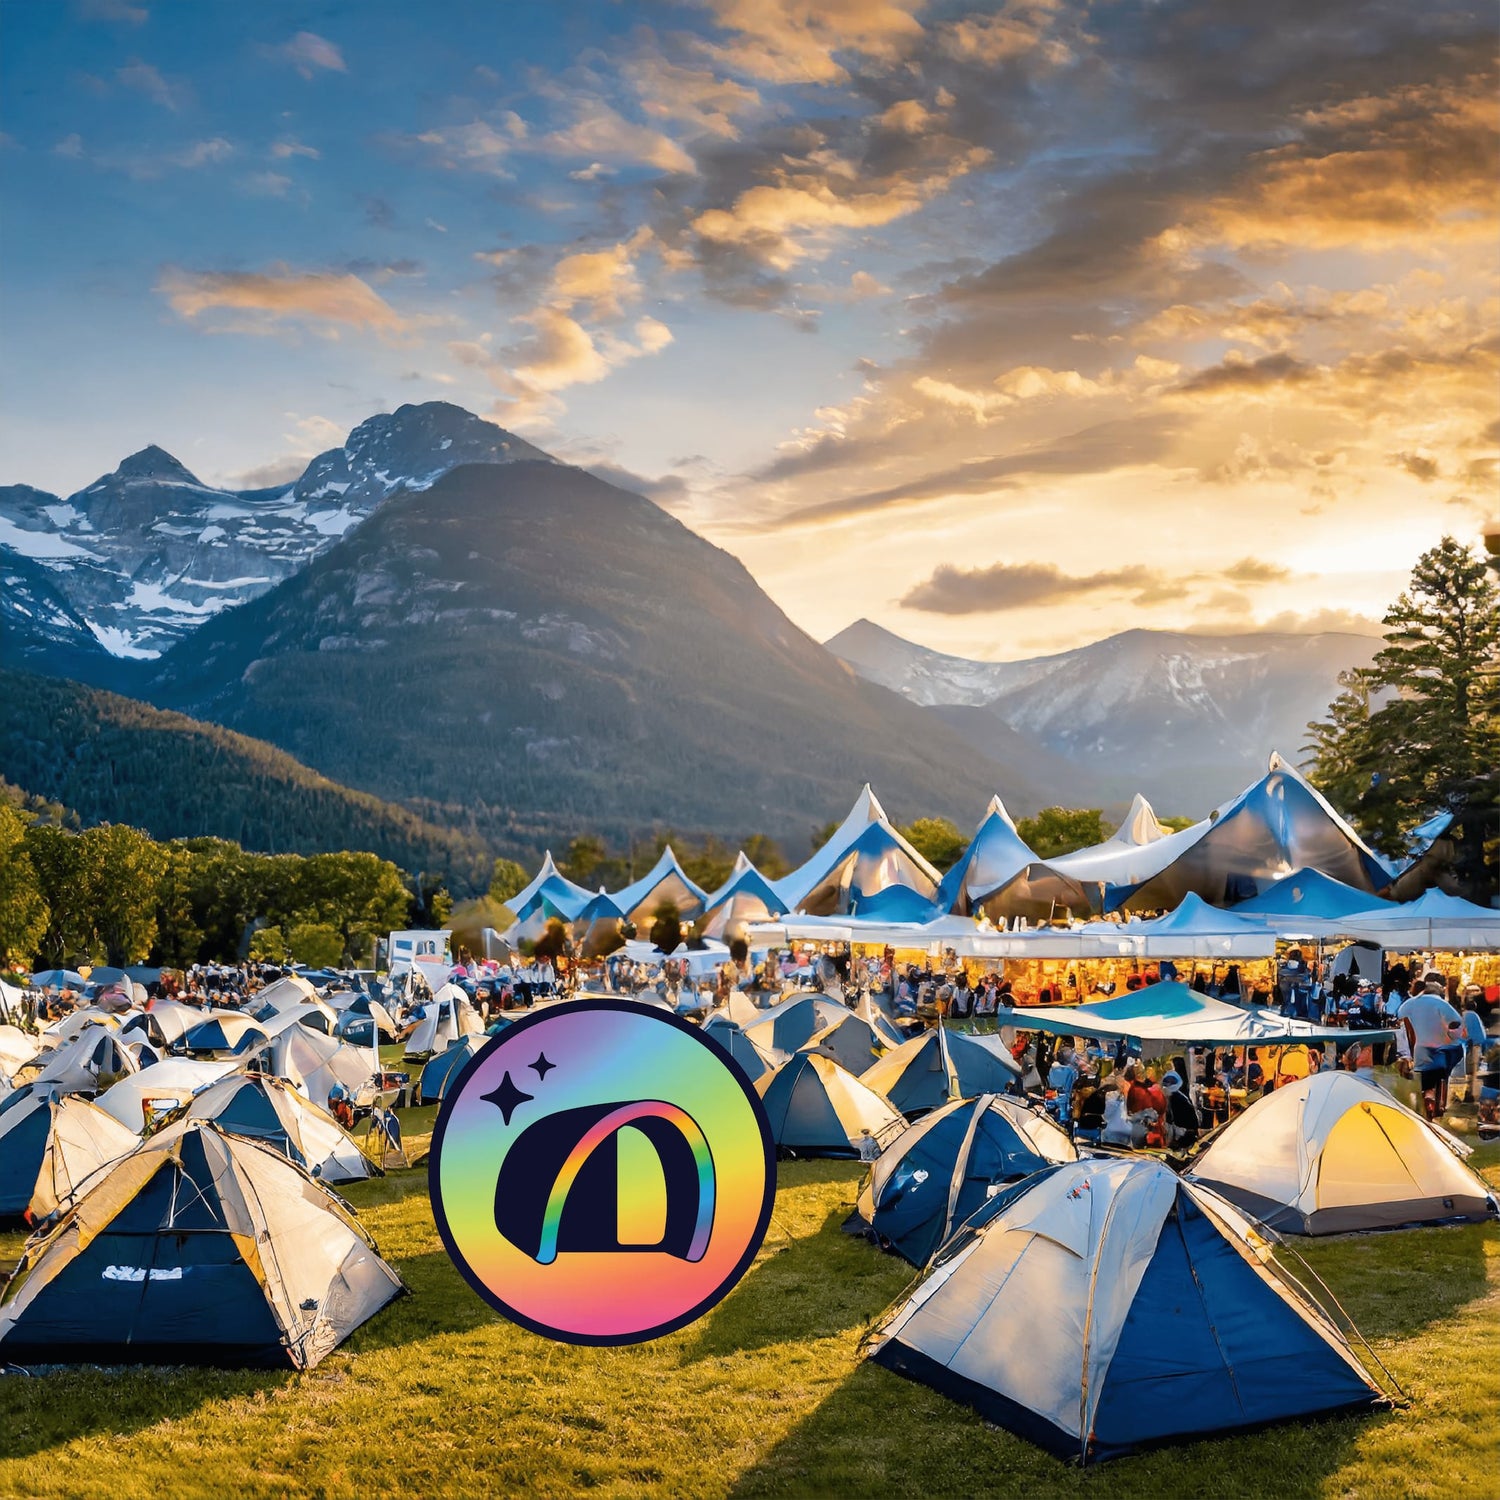 Mountain festival with old style tents and the Good inTents Circle Logo